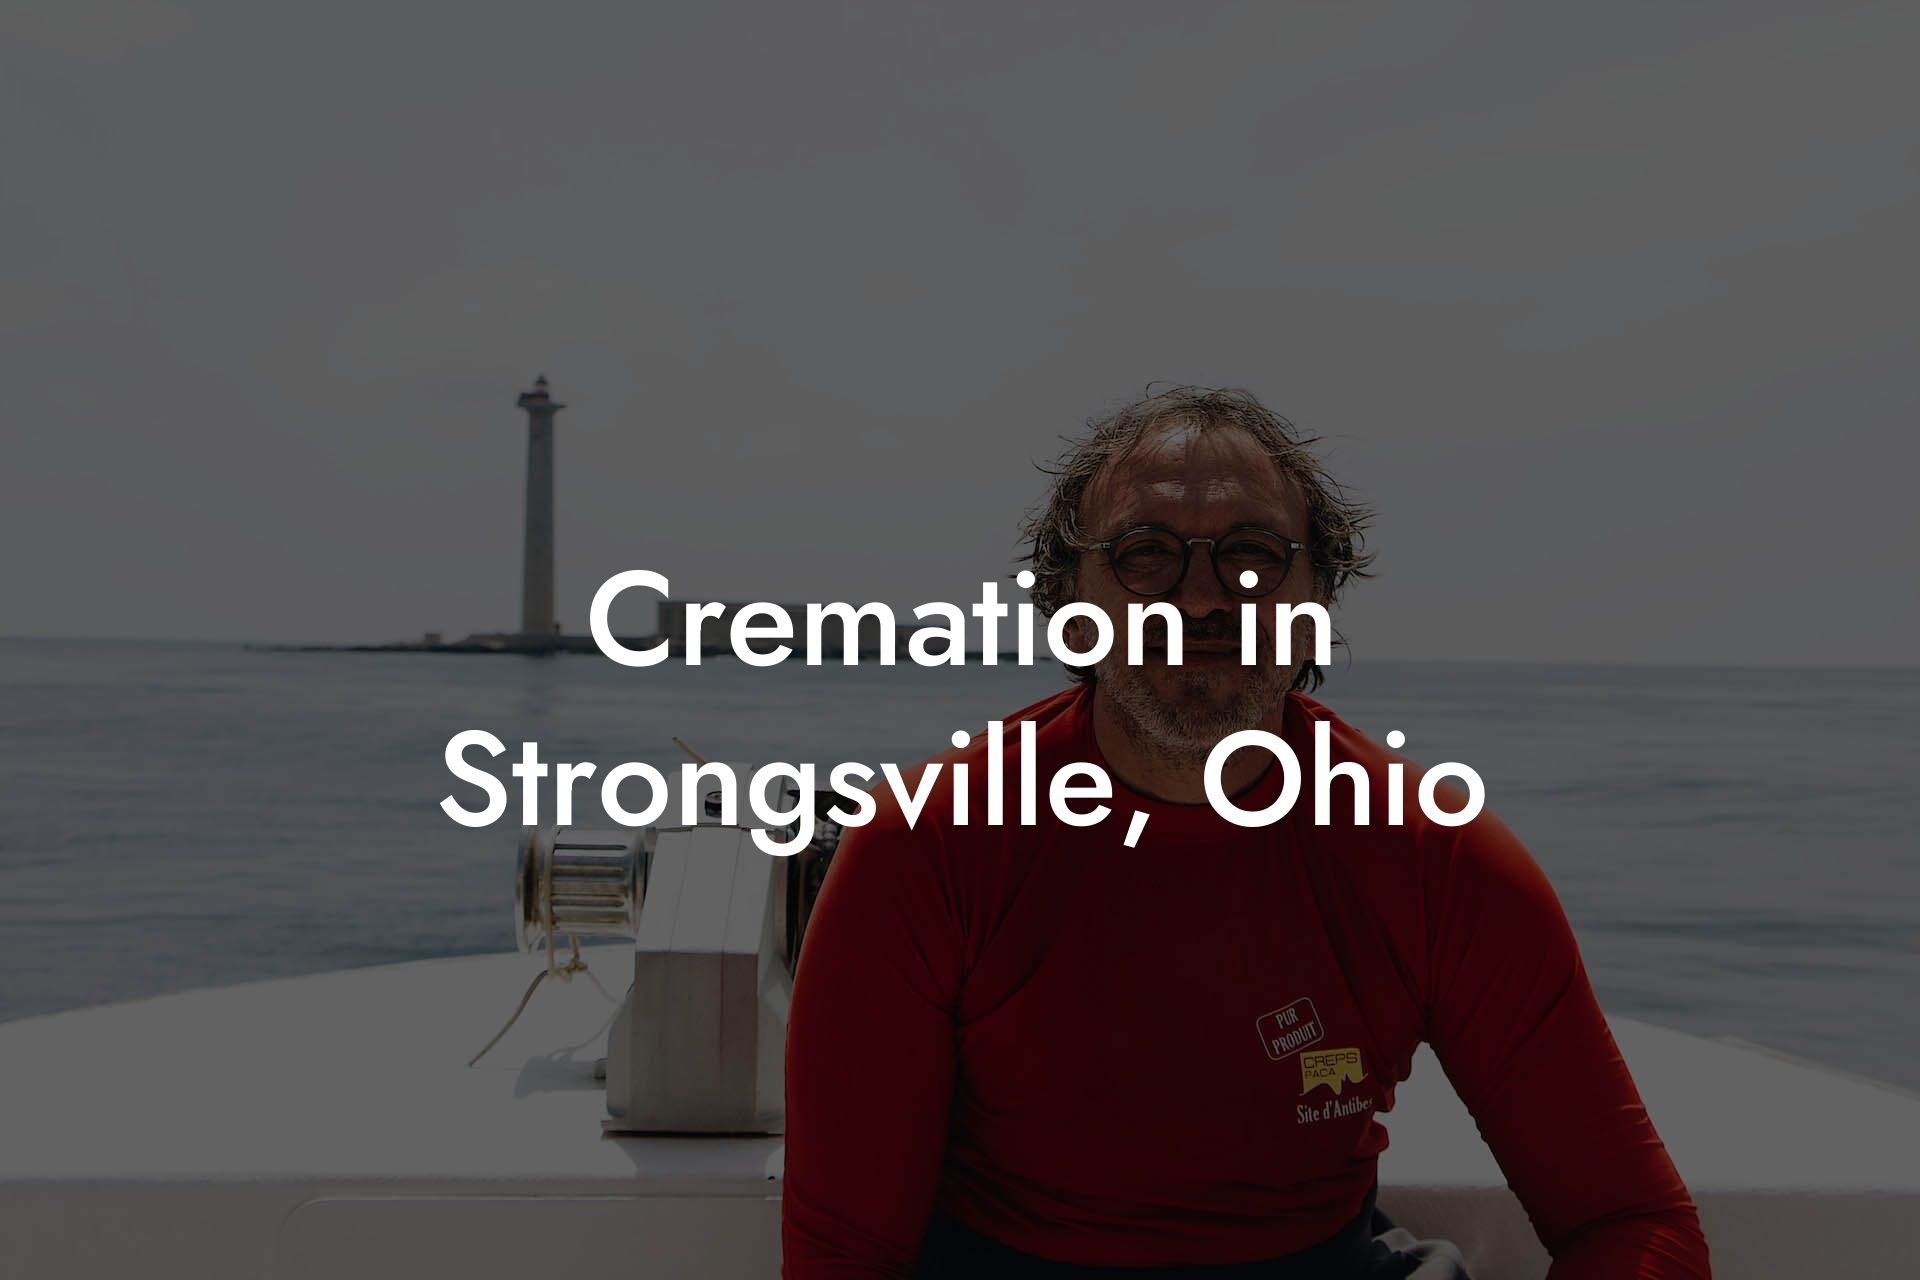 Cremation in Strongsville, Ohio